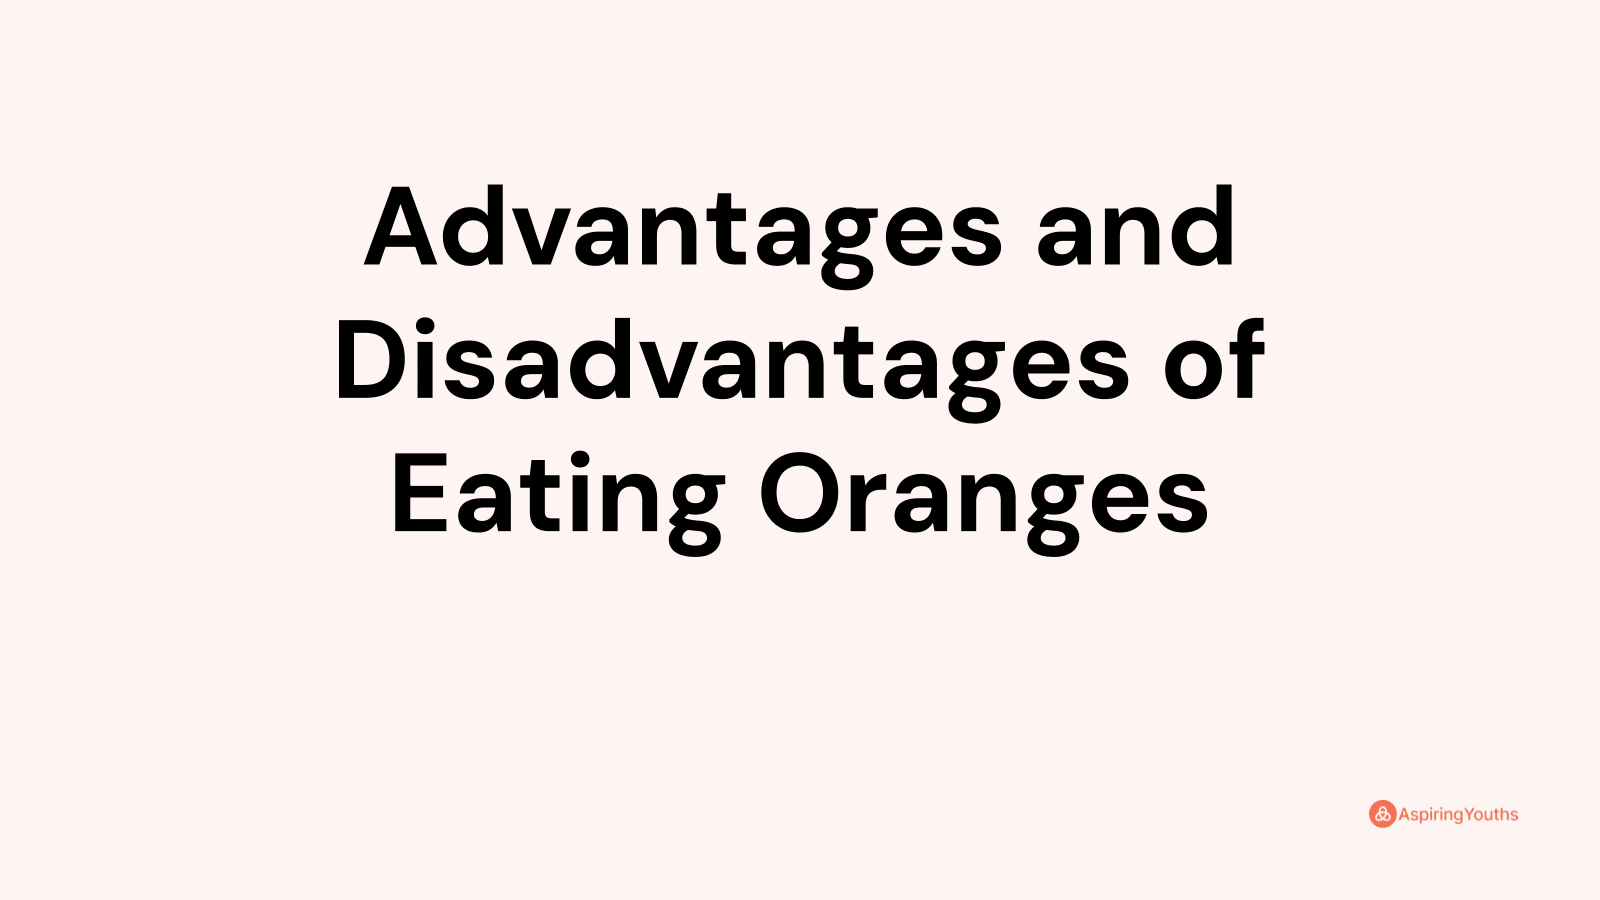 Advantages and disadvantages of Eating Oranges